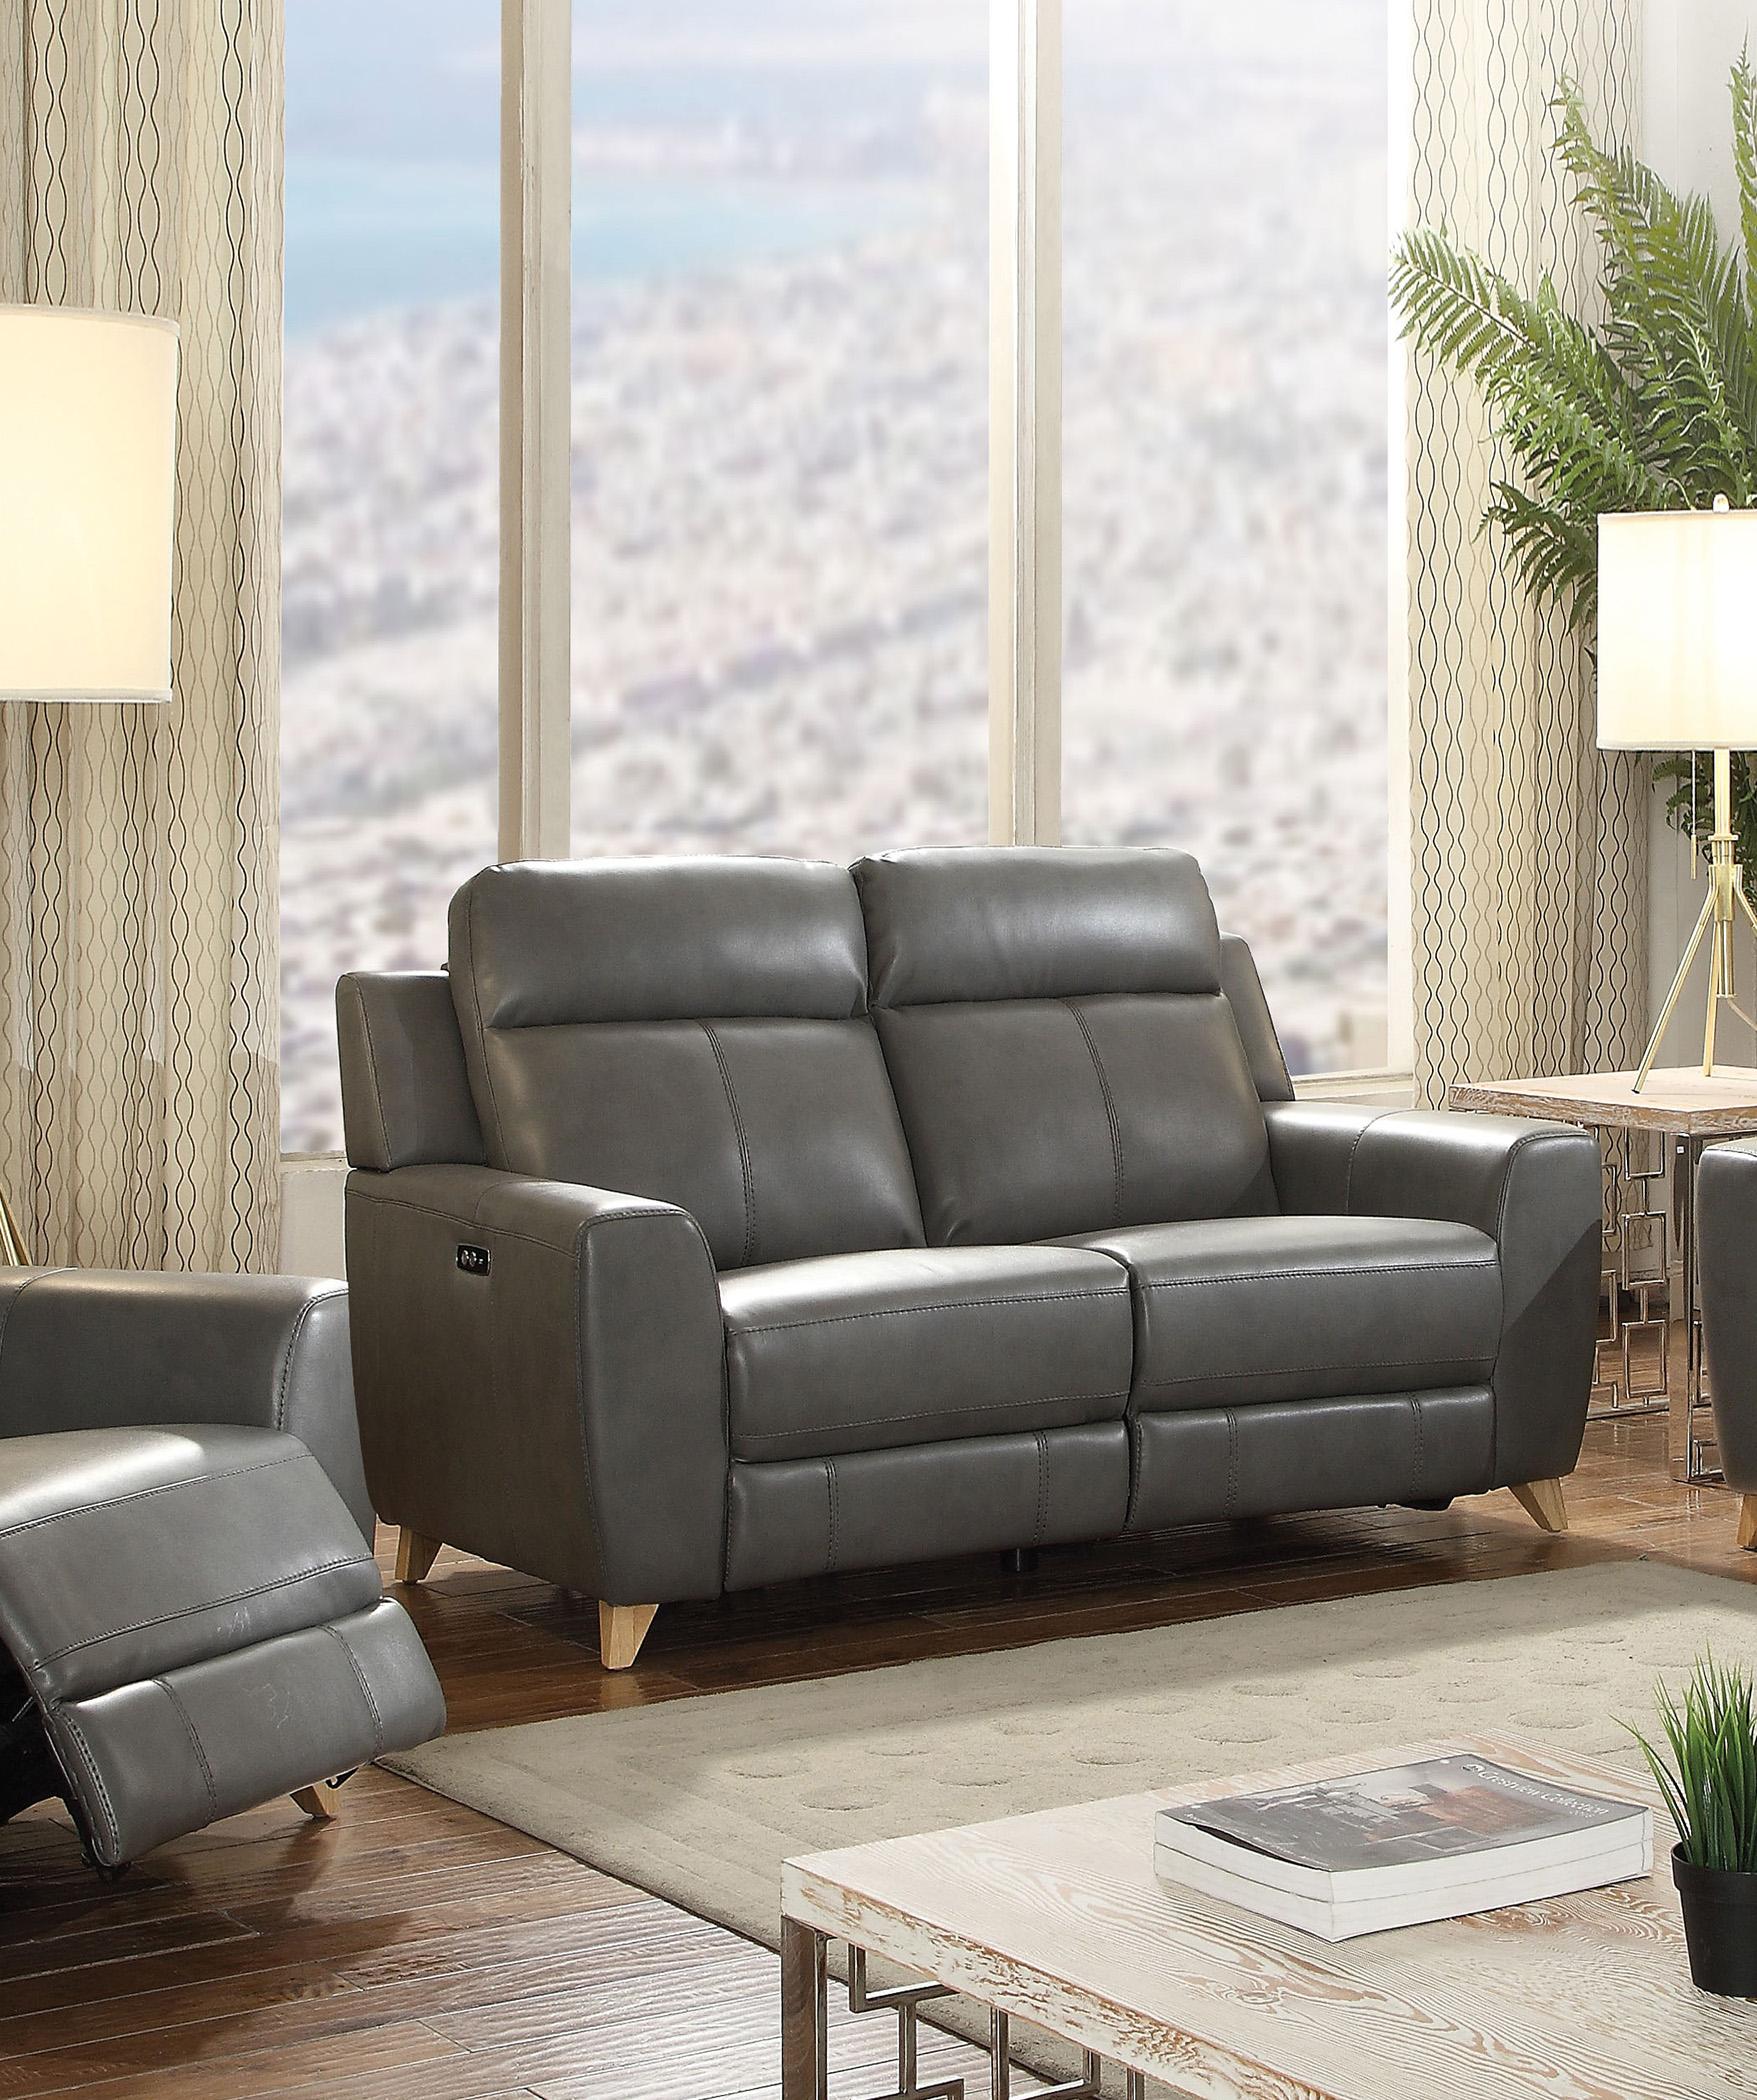 Contemporary Reclining Loveseat Cayden-54201 Cayden-54201 in Gray Faux Leather